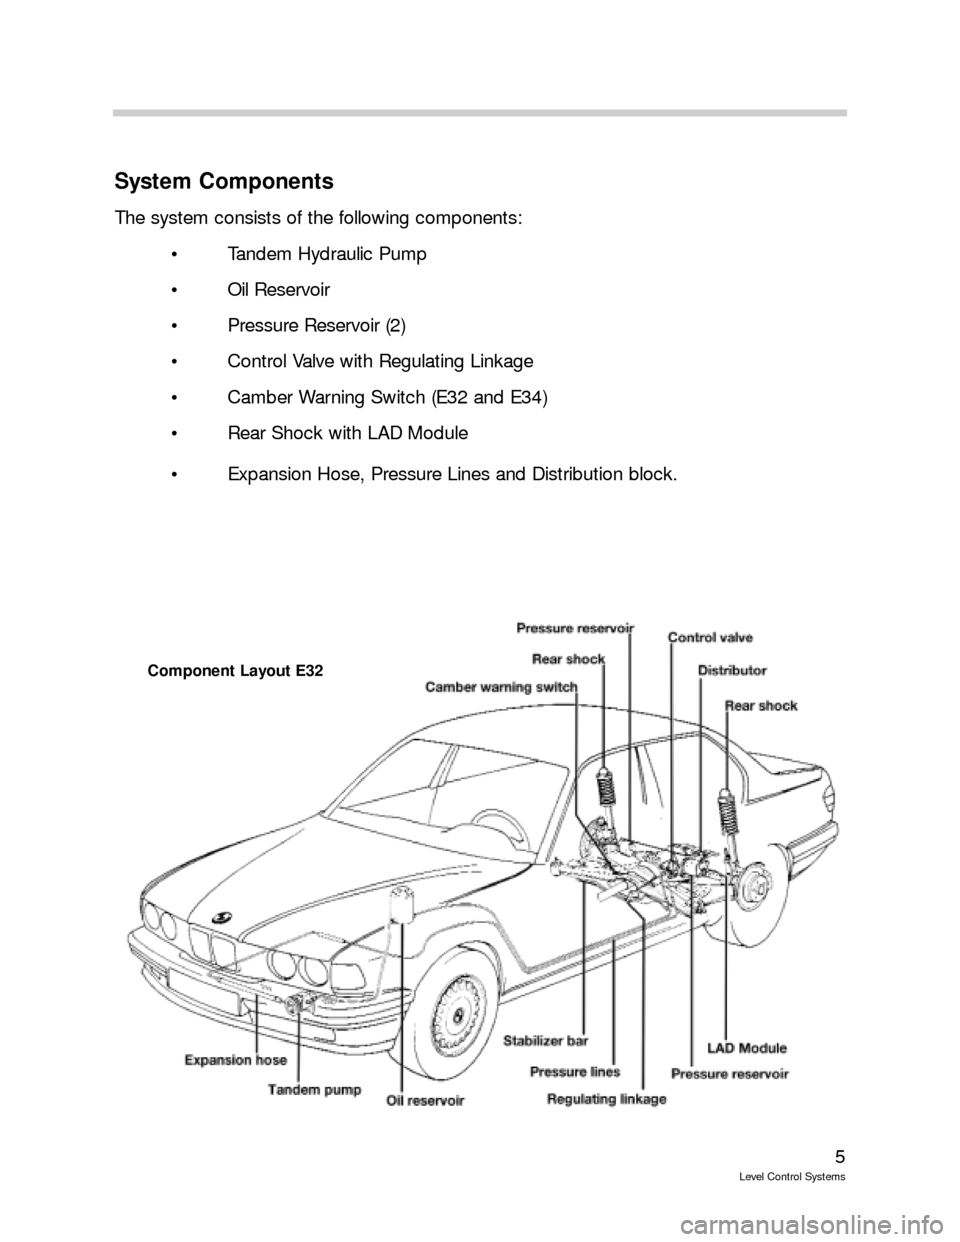 BMW X5 1999 E53 Level Control System Manual 5
Level Control Systems
System Components
The system consists of the following components:
 Tandem Hydraulic Pump
 Oil Reservoir
 Pressure Reservoir (2)
 Control Valve with Regulating Linkage
 Ca